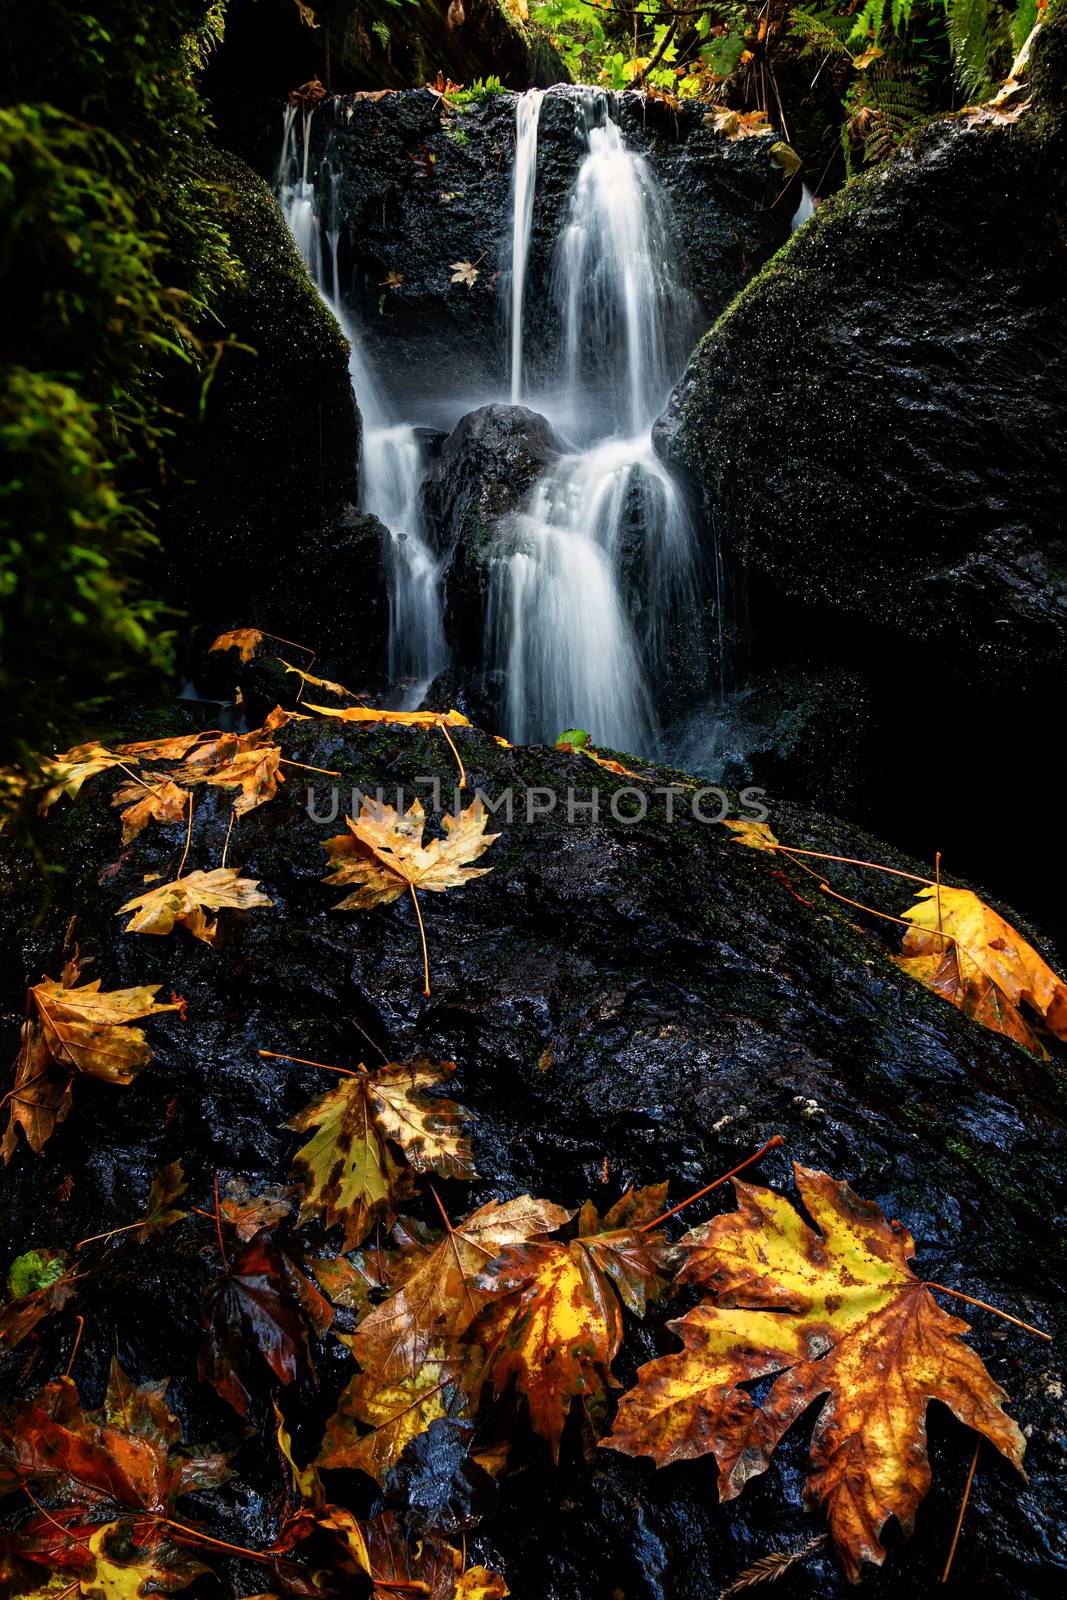 A Small Waterfall in Autumn with Maple Leaves by backyard_photography